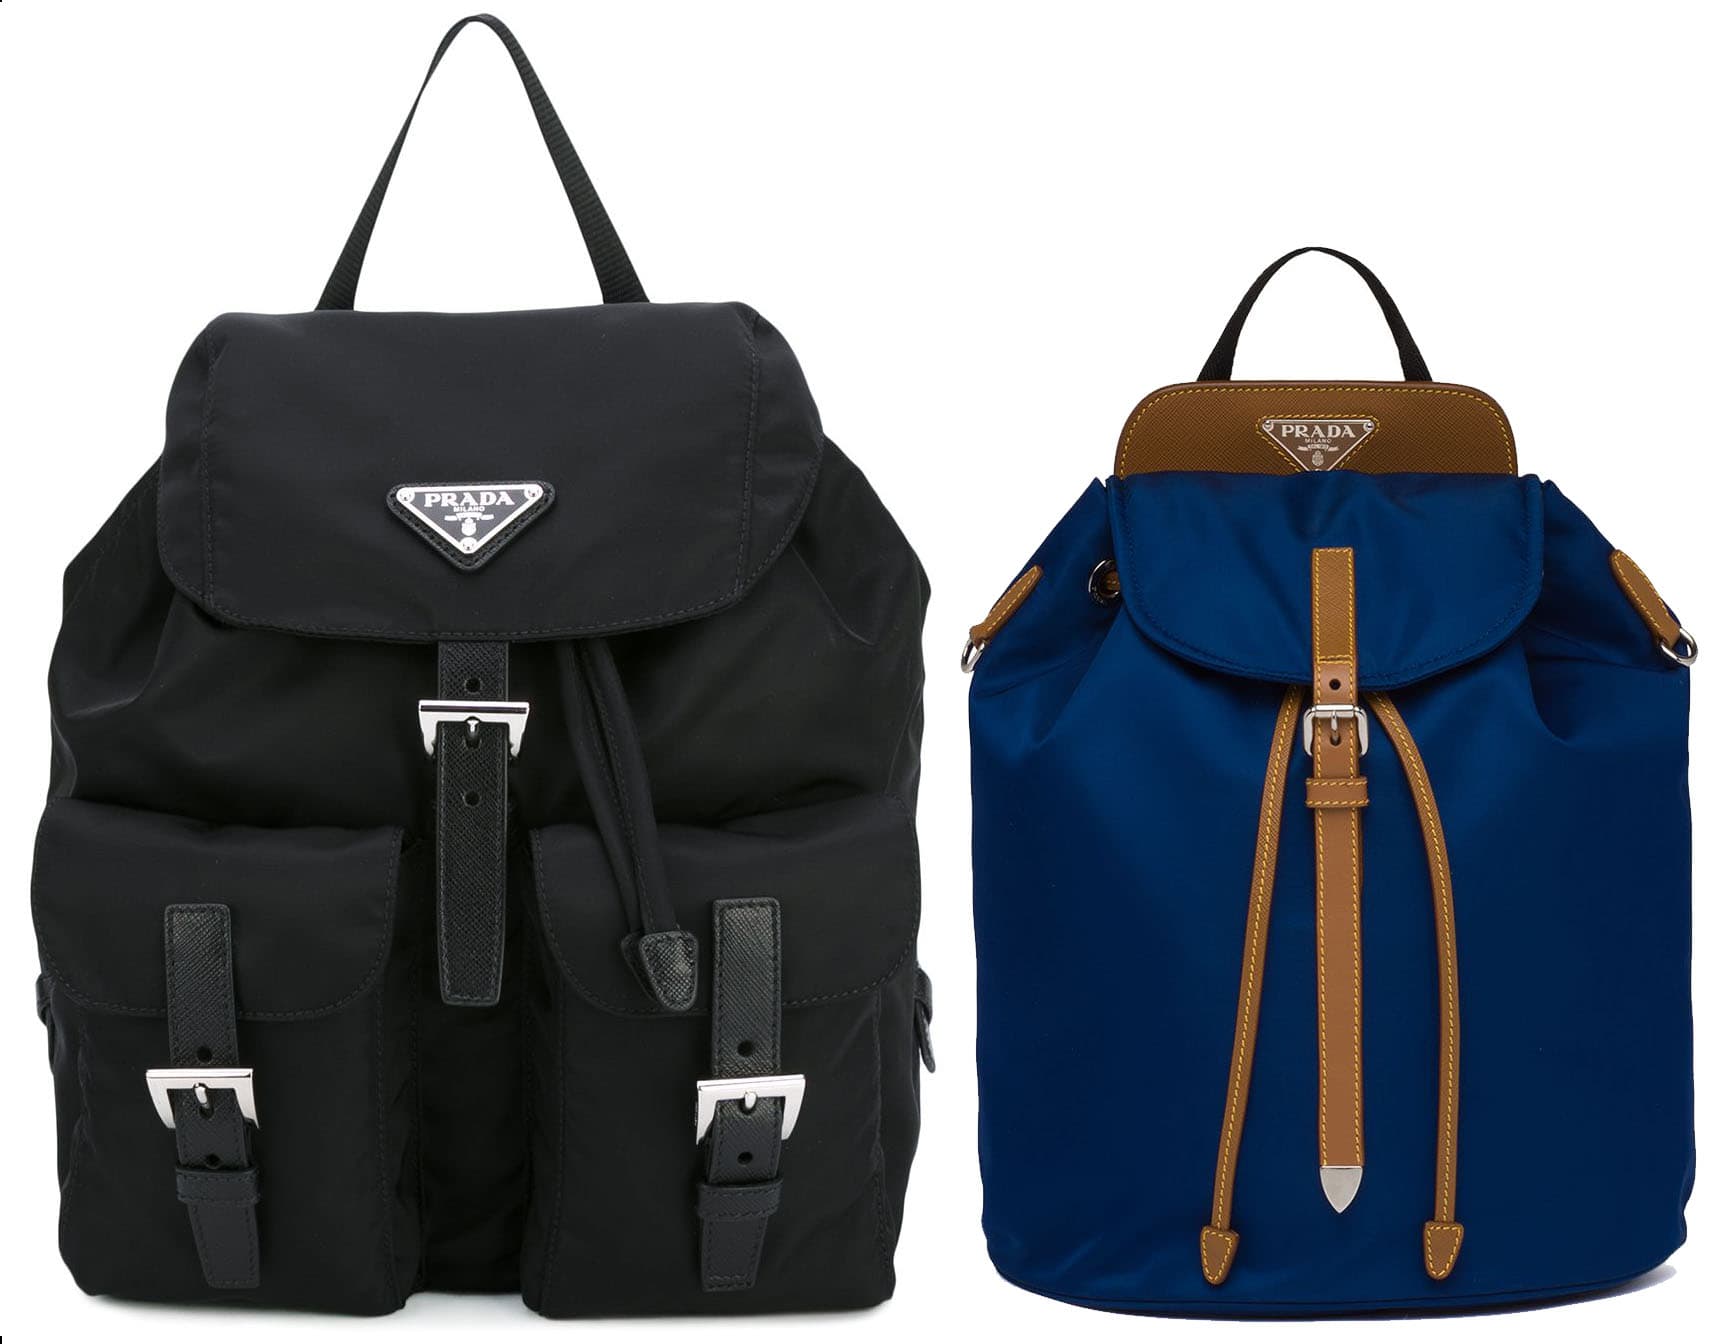 Prada's nylon backpacks are not only chic but also durable and water-resistant